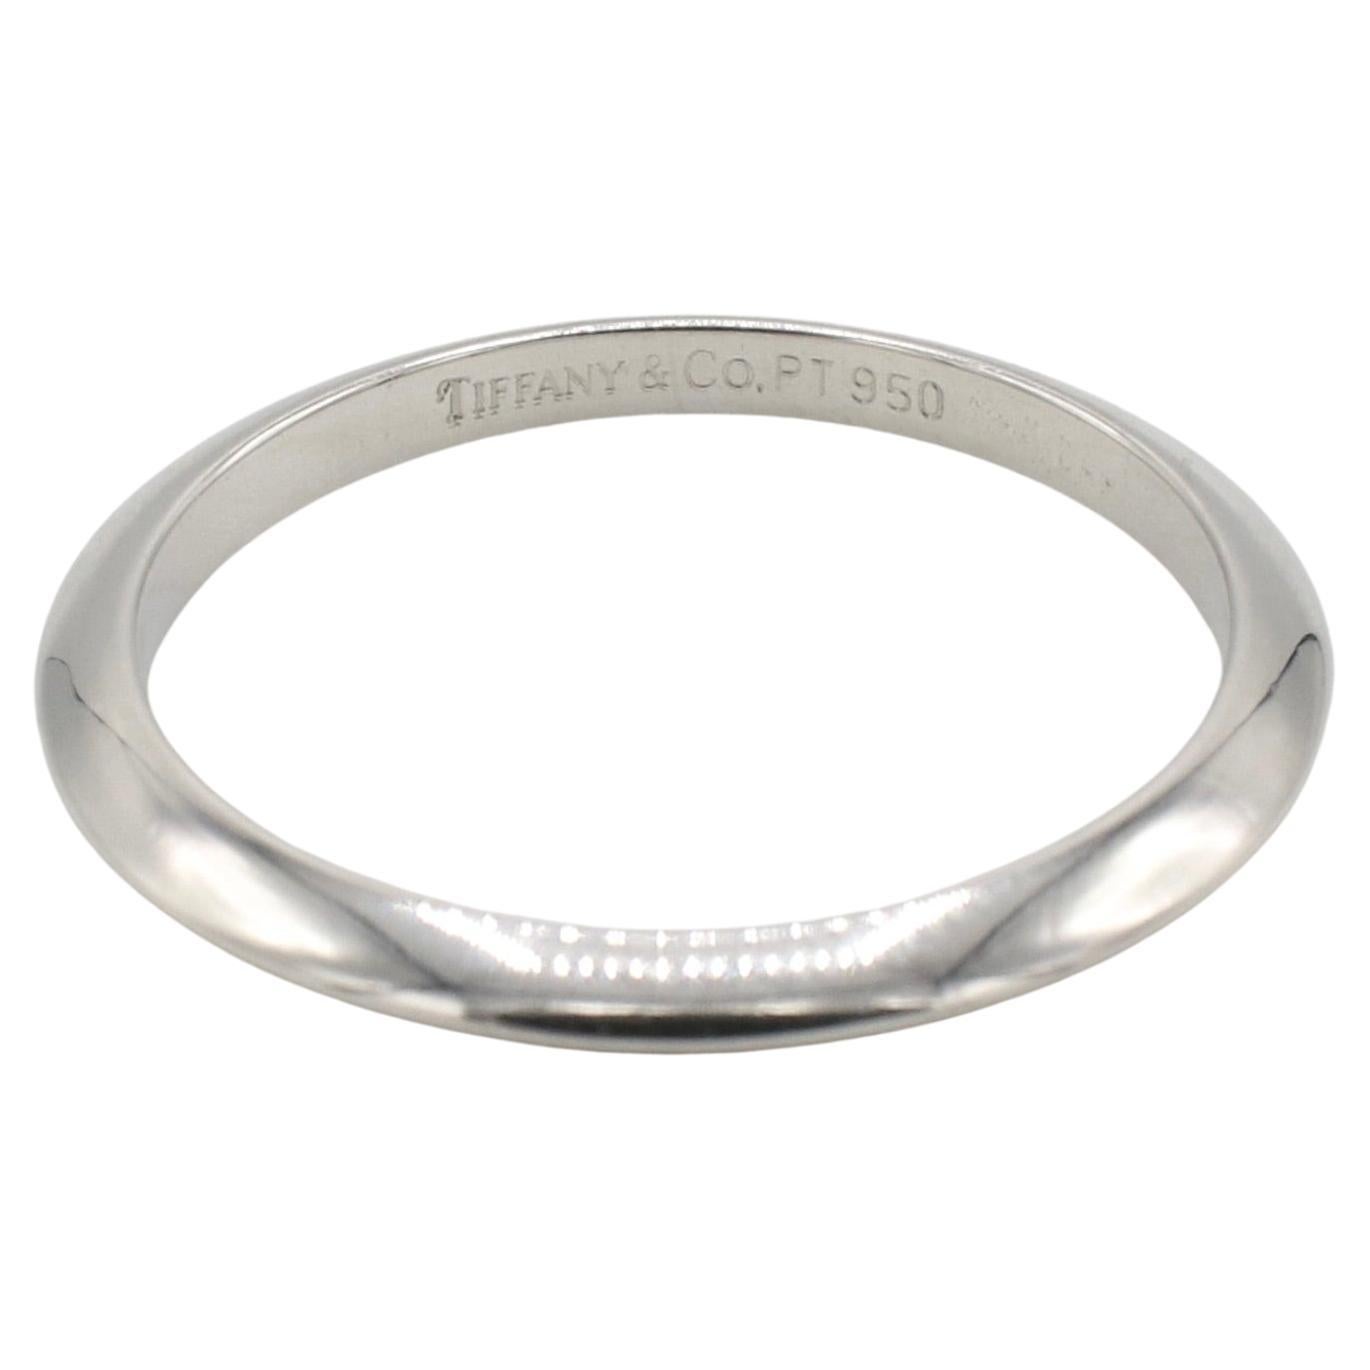 Tiffany & Co. Platinum Wedding Band Ring 
Weight: 2.40 grams
Width: 2mm
Signed: Tiffany & Co. 950
Size: 5.5 (US)
